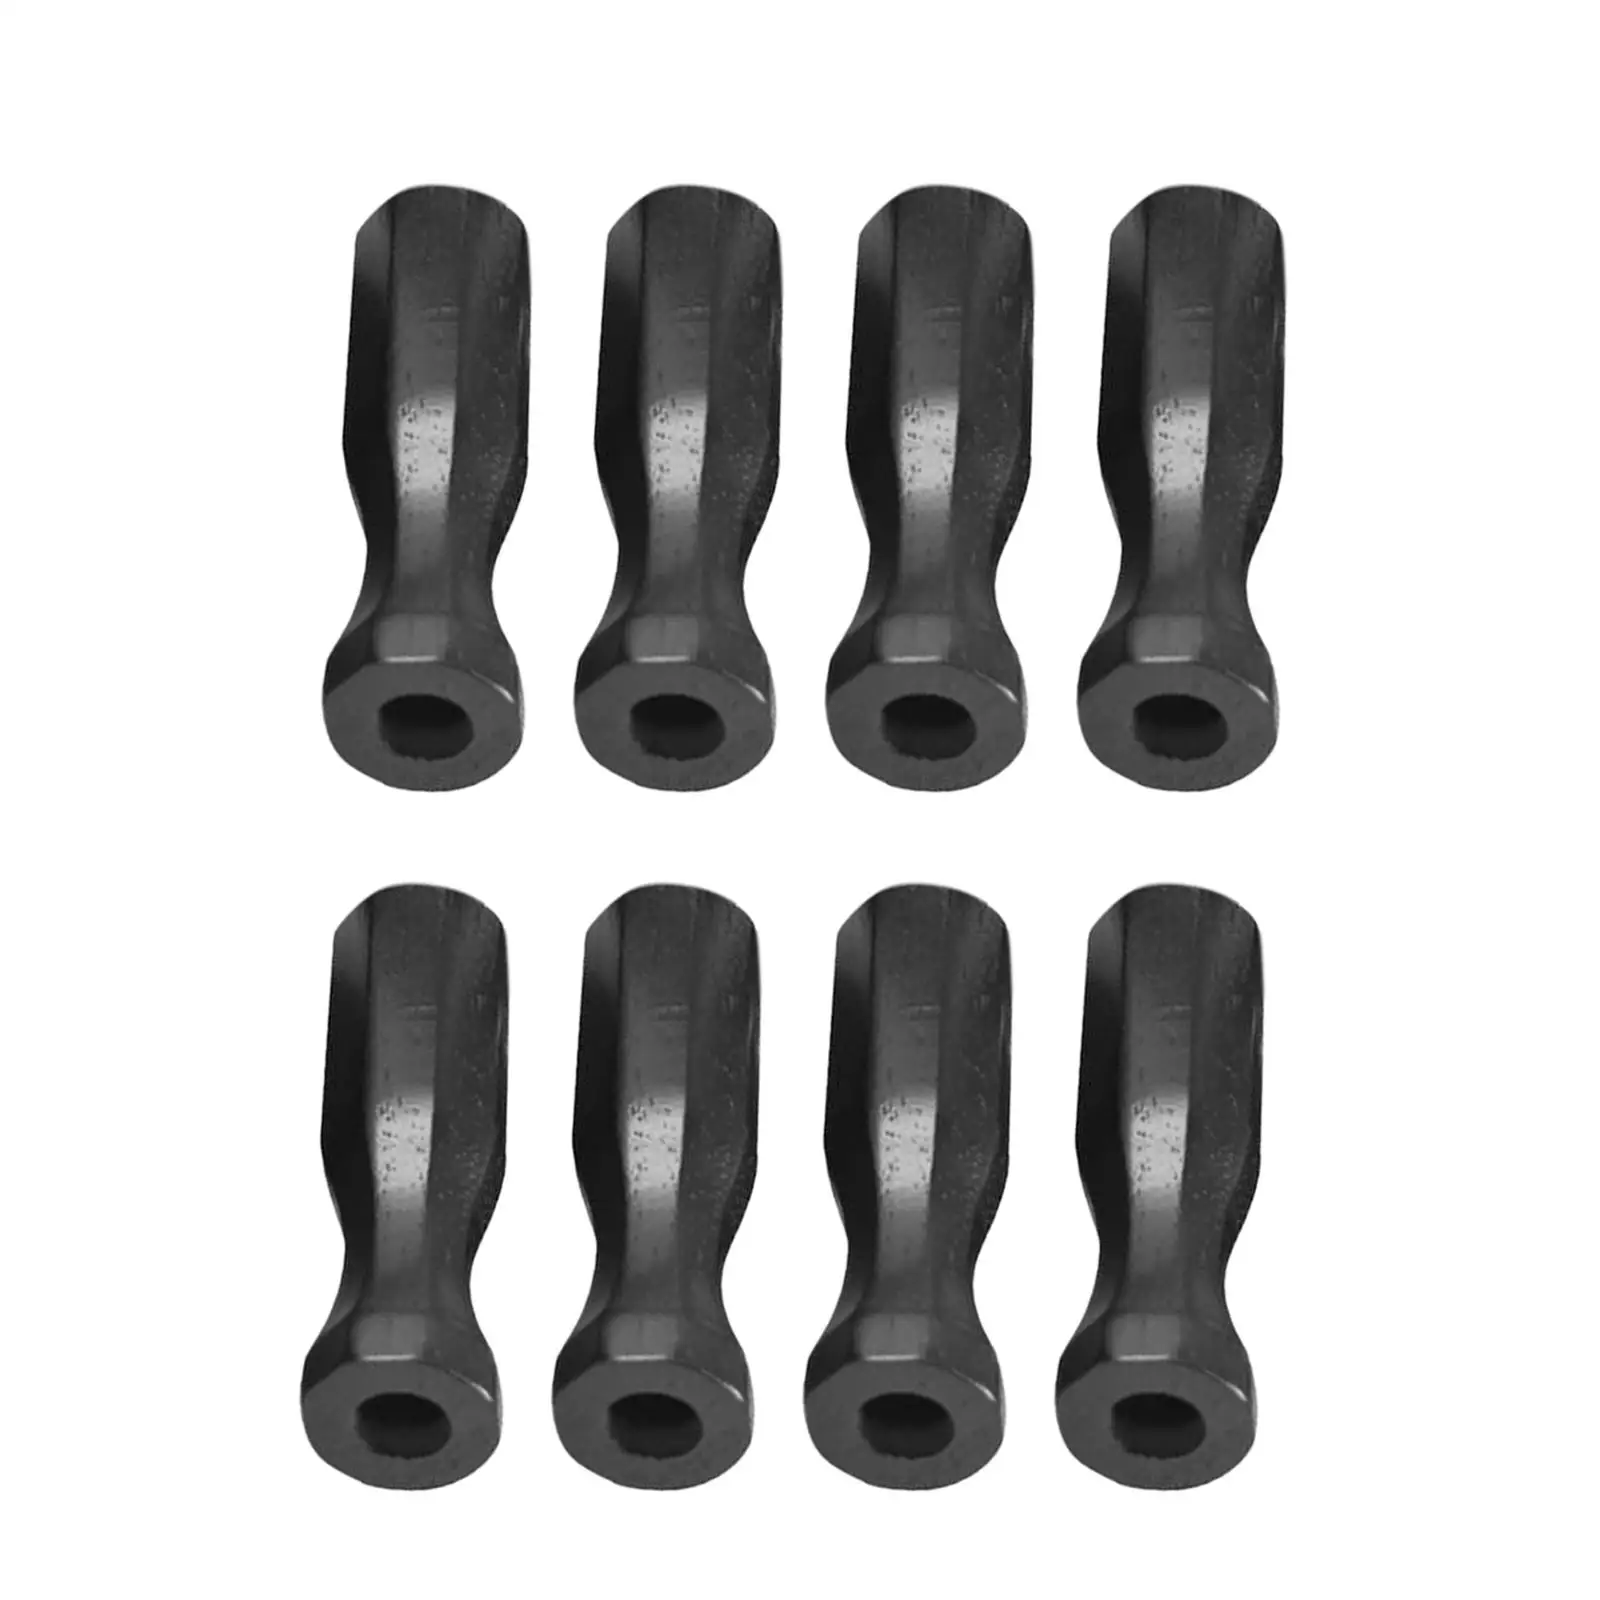 8Pcs Soccer Table Handles Portable Replacements for Child Standard Foosball Tables Foosball Accessories Soccer Machine Indoor